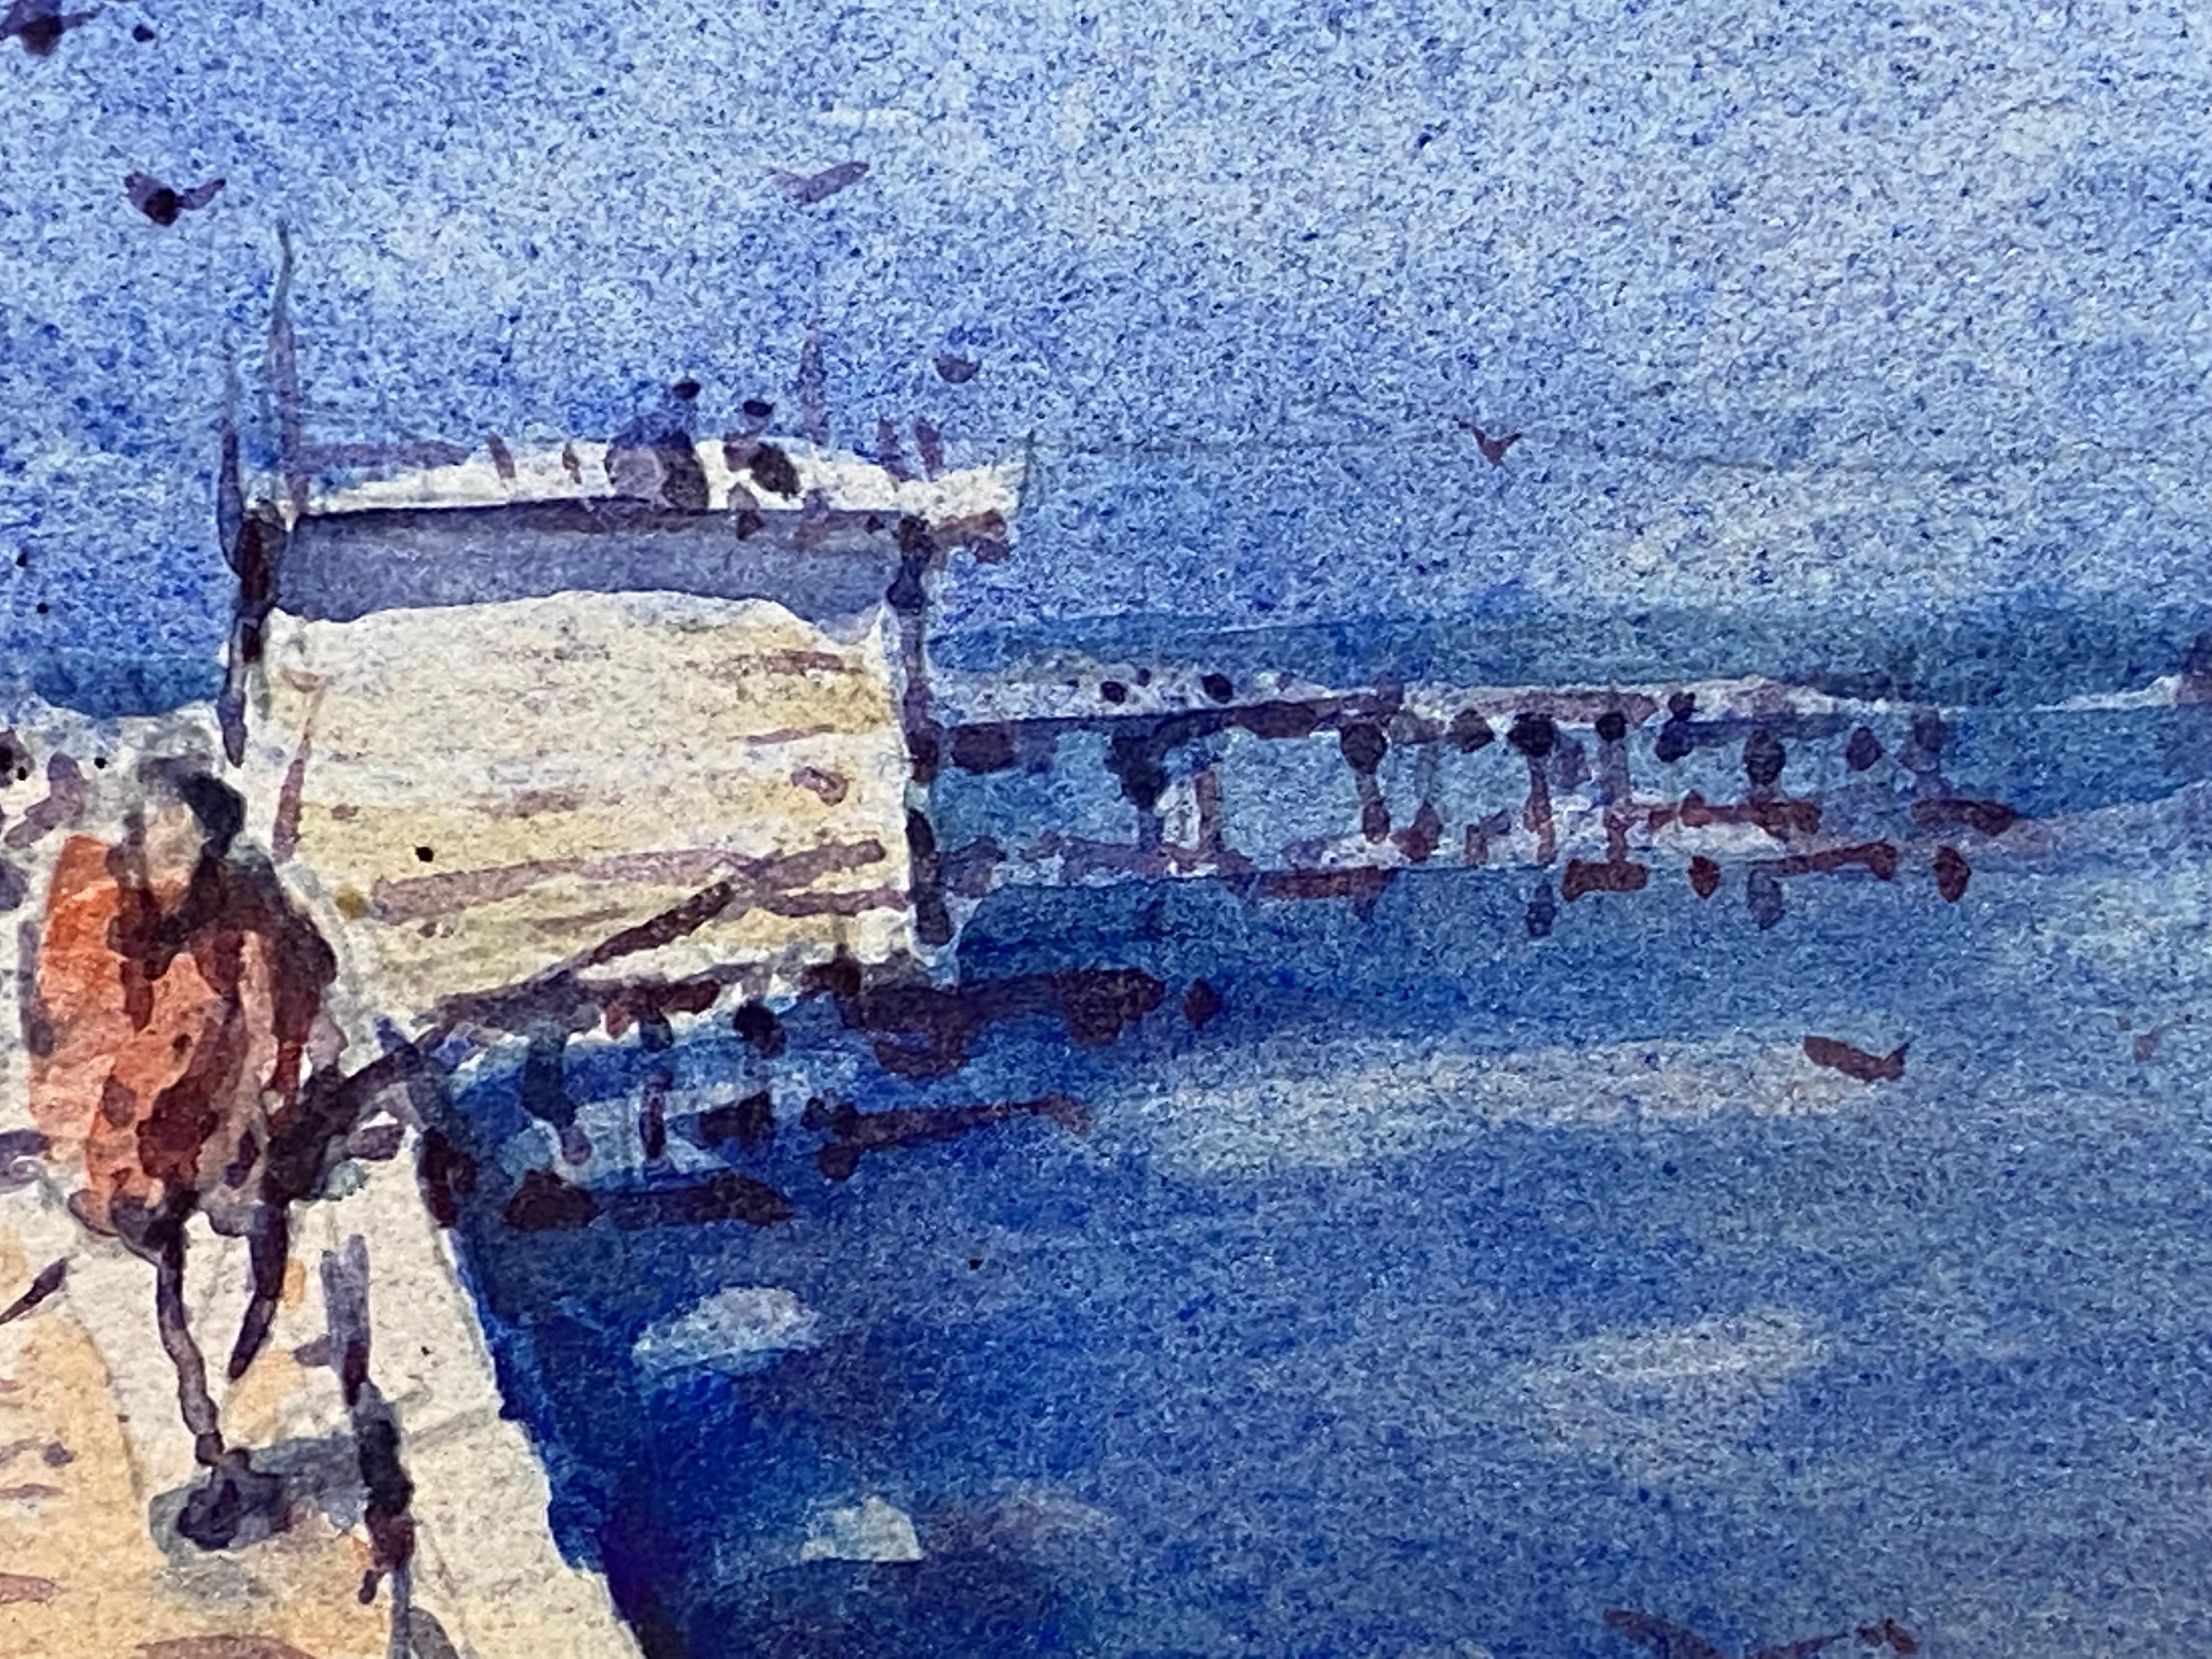 FISHERMAN ON JETTY - MAURICE MAZEILIE - FRENCH IMPRESSIONIST SIGNED WATERCOLOR - Painting by Maurice Mazeilie